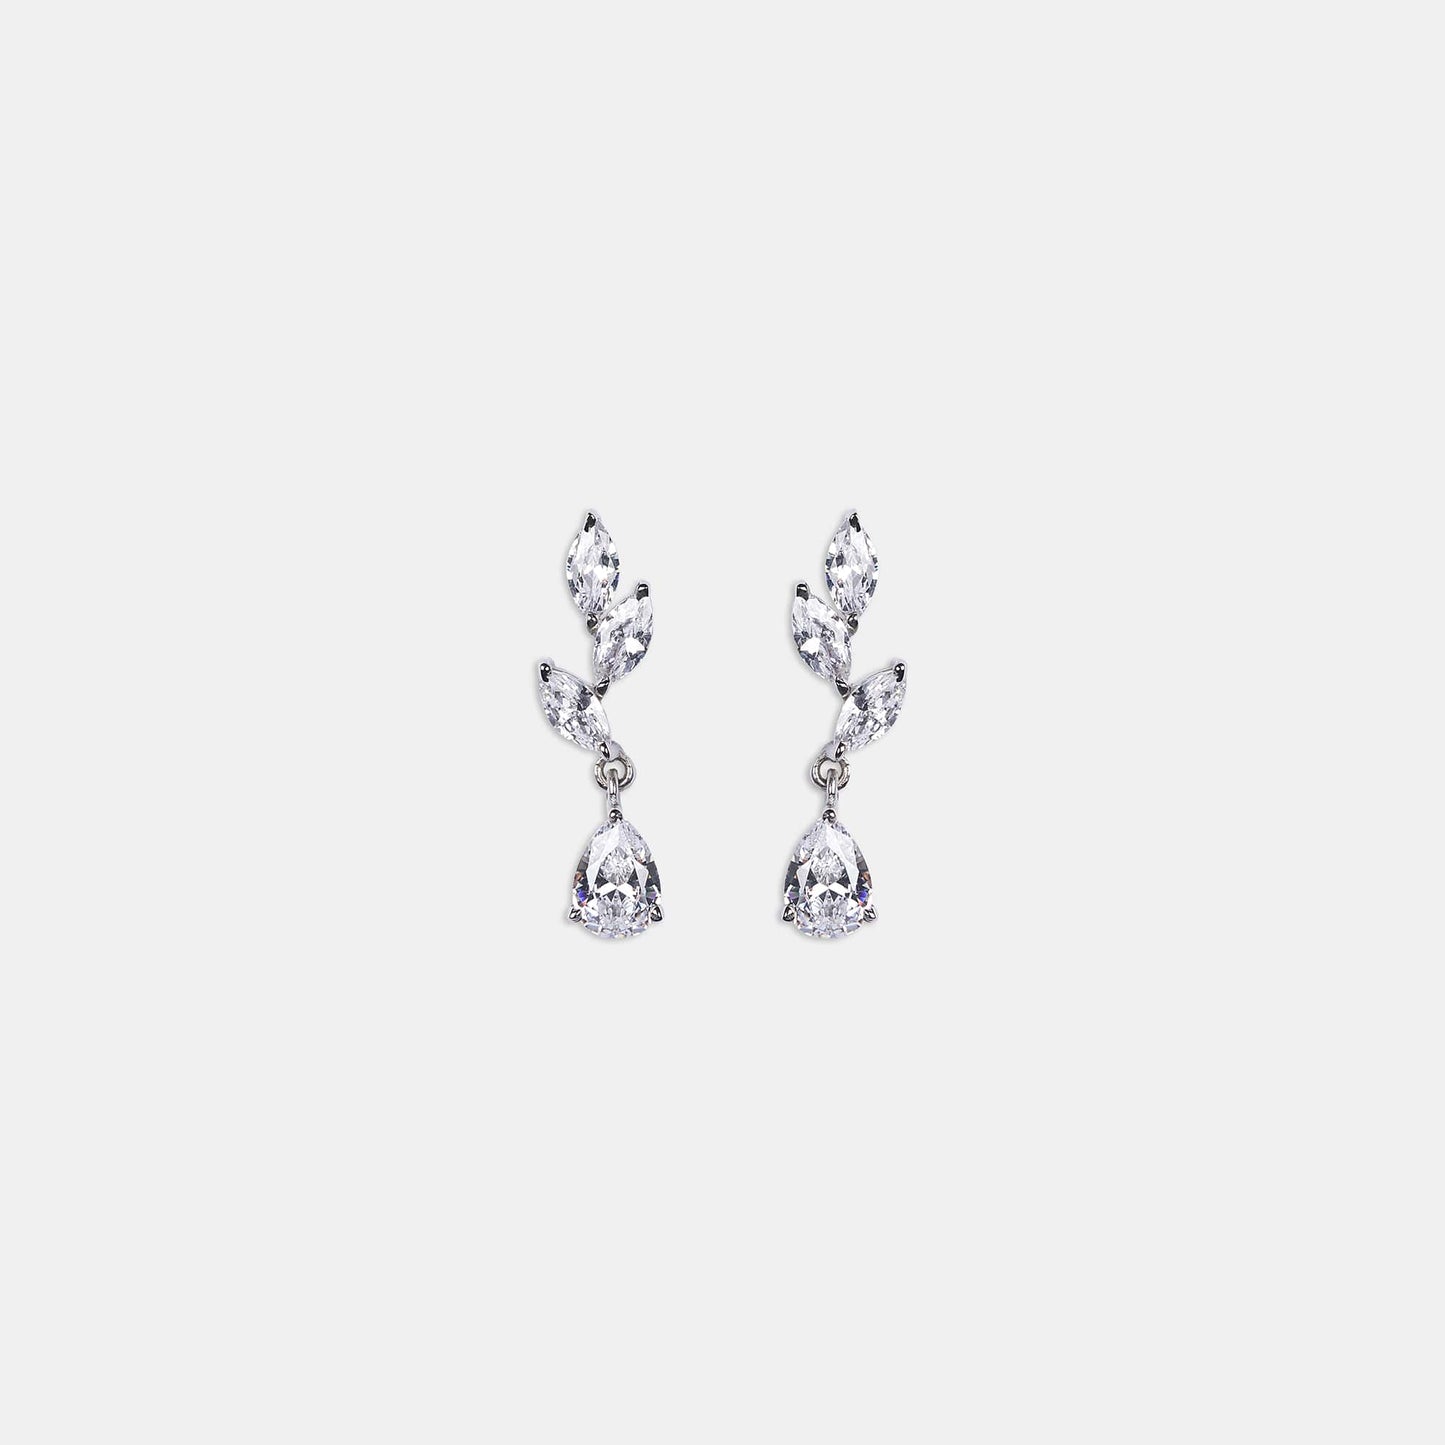 Discover our stunning collection of sterling silver tree-shaped earrings, the perfect elegant and nature-inspired accessory for any occasion.